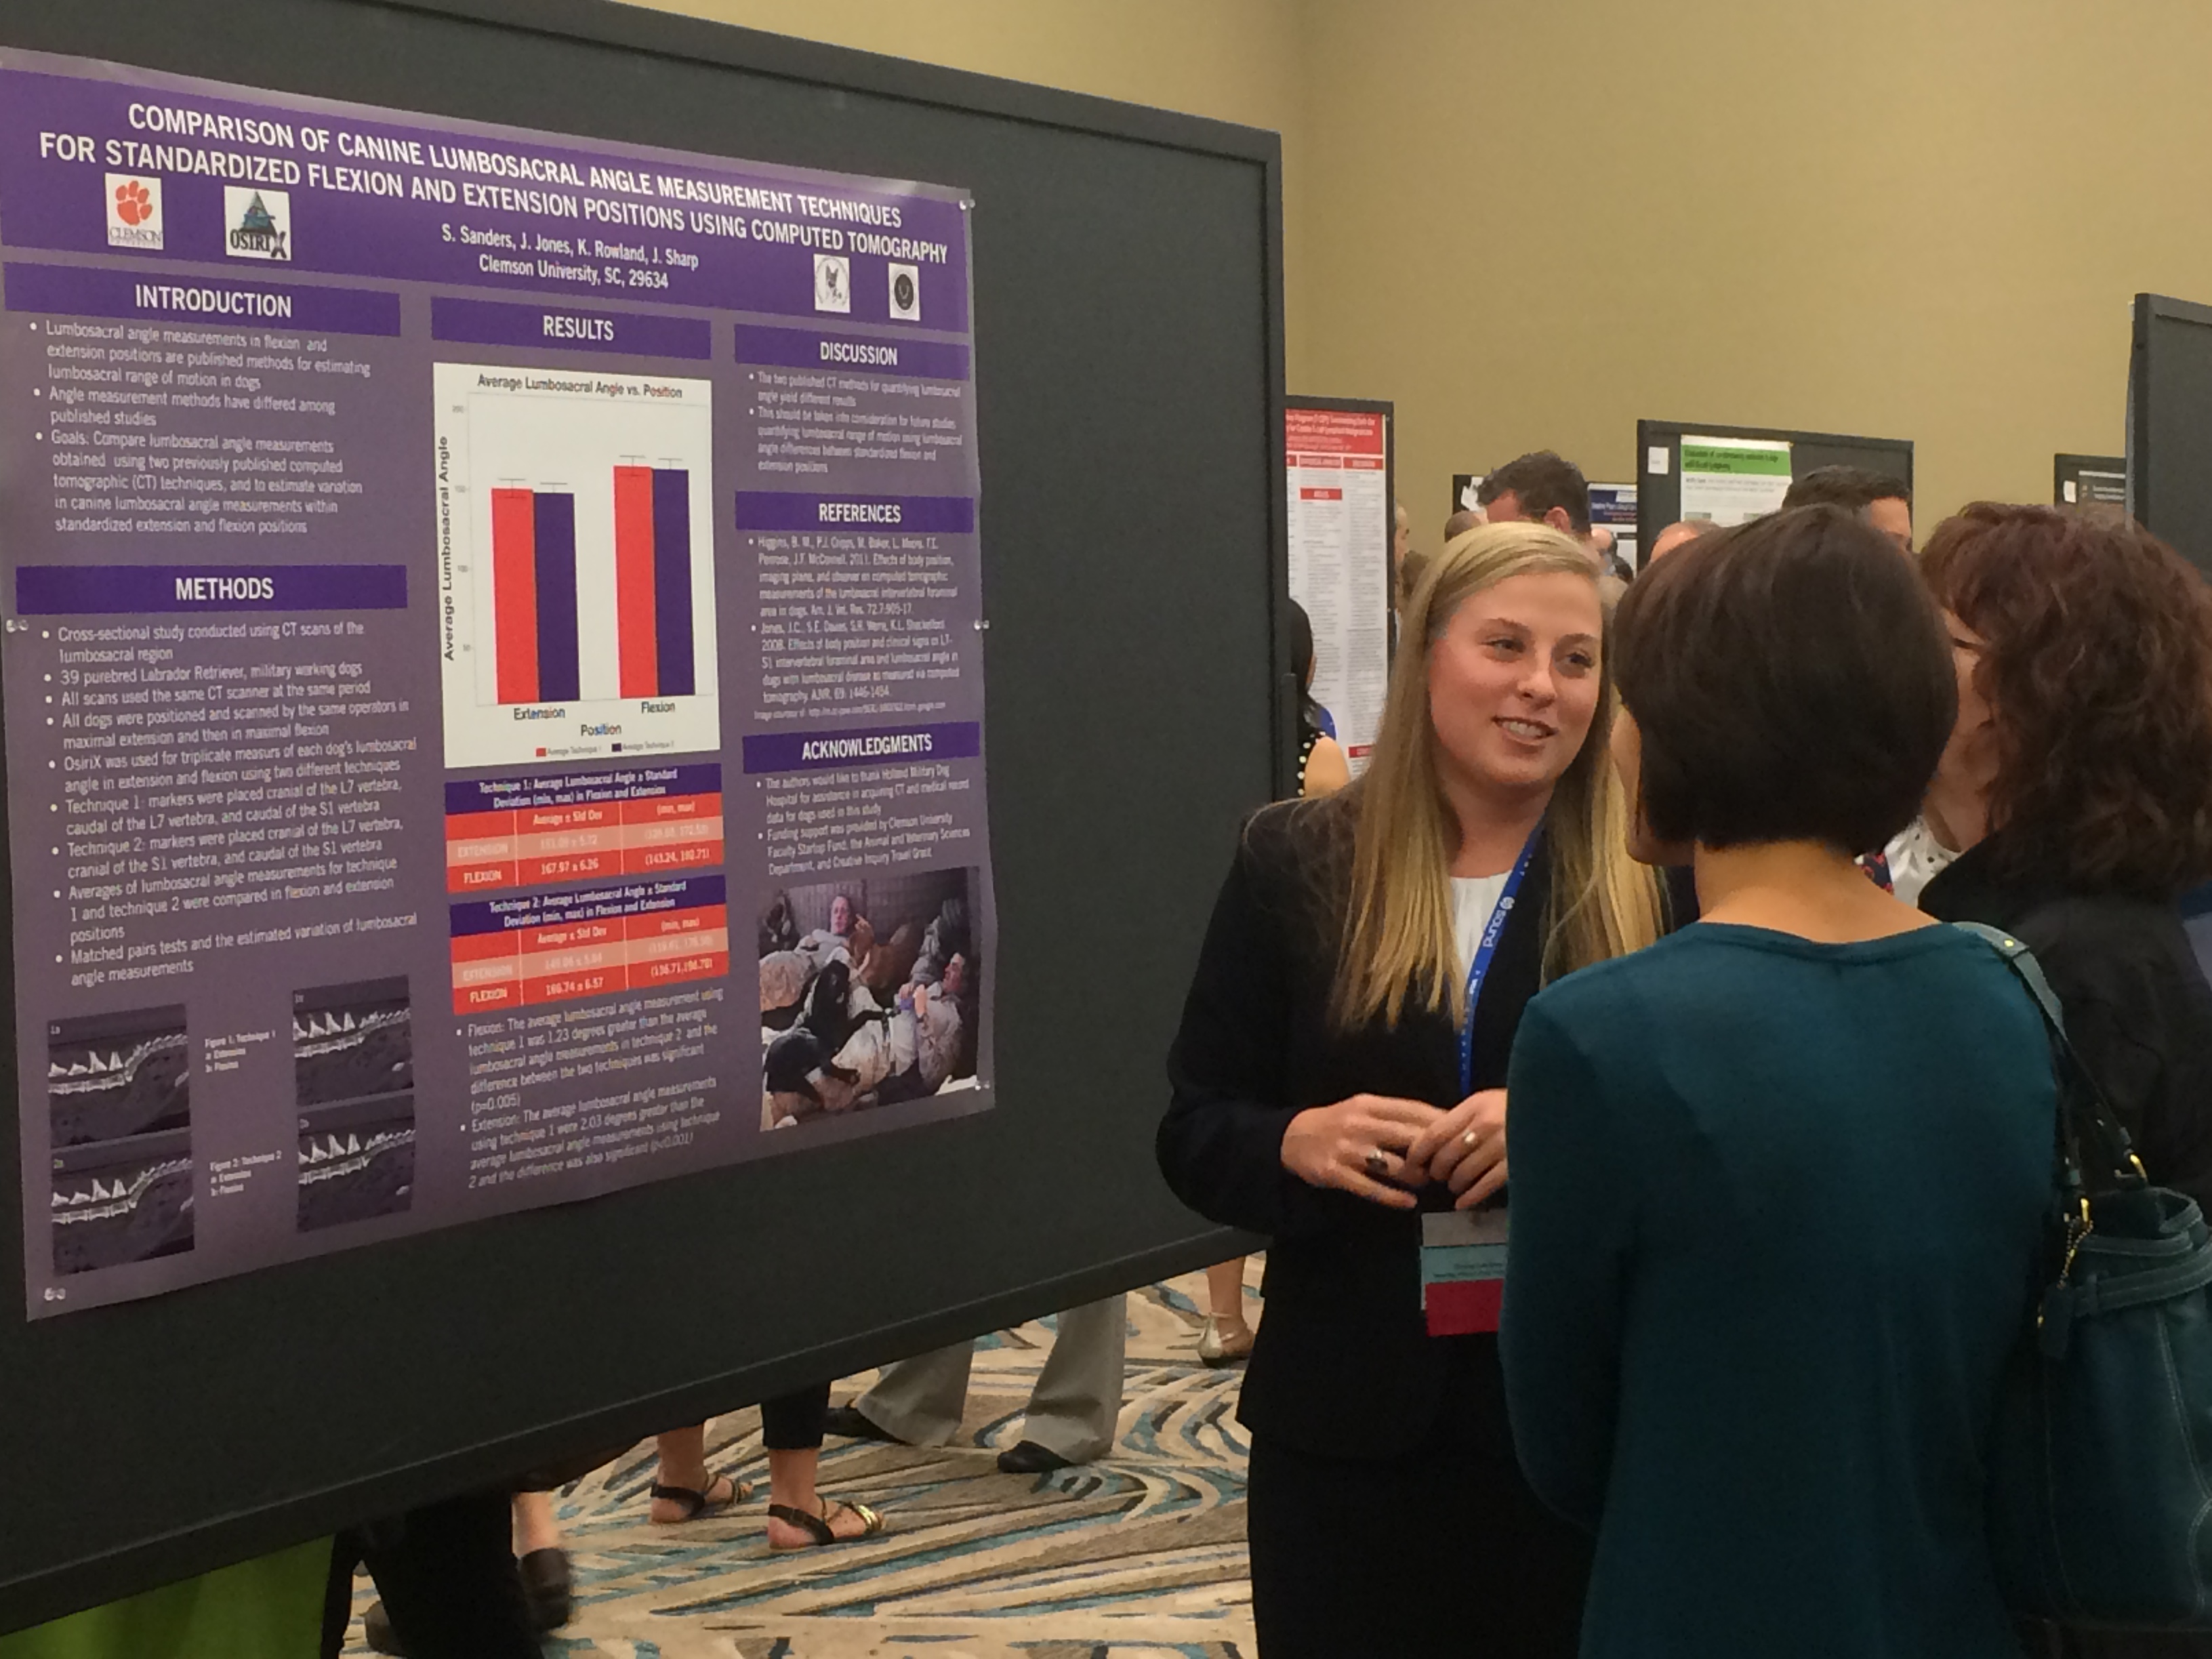 Samantha Sanders presenting her research poster at the 2016 Annual Scientific Conference of the American College of Veterinary Radiology.